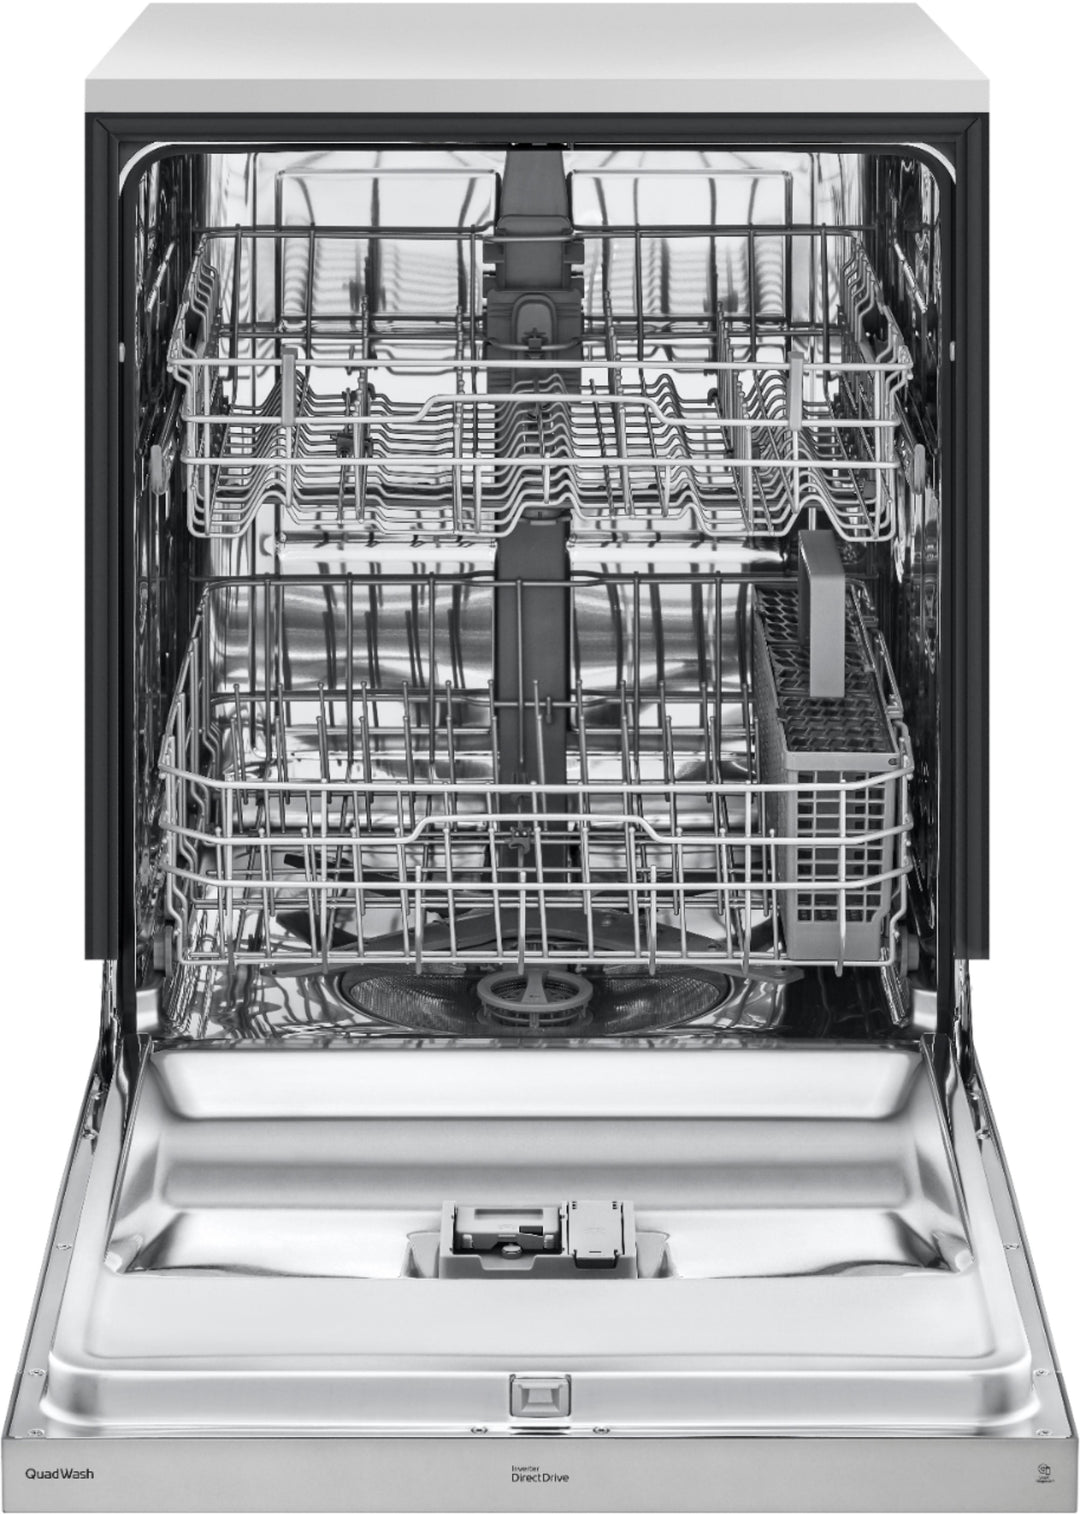 LG - 24" Front-Control Built-In Dishwasher with Stainless Steel Tub, QuadWash, 50 dBa - Stainless steel_15